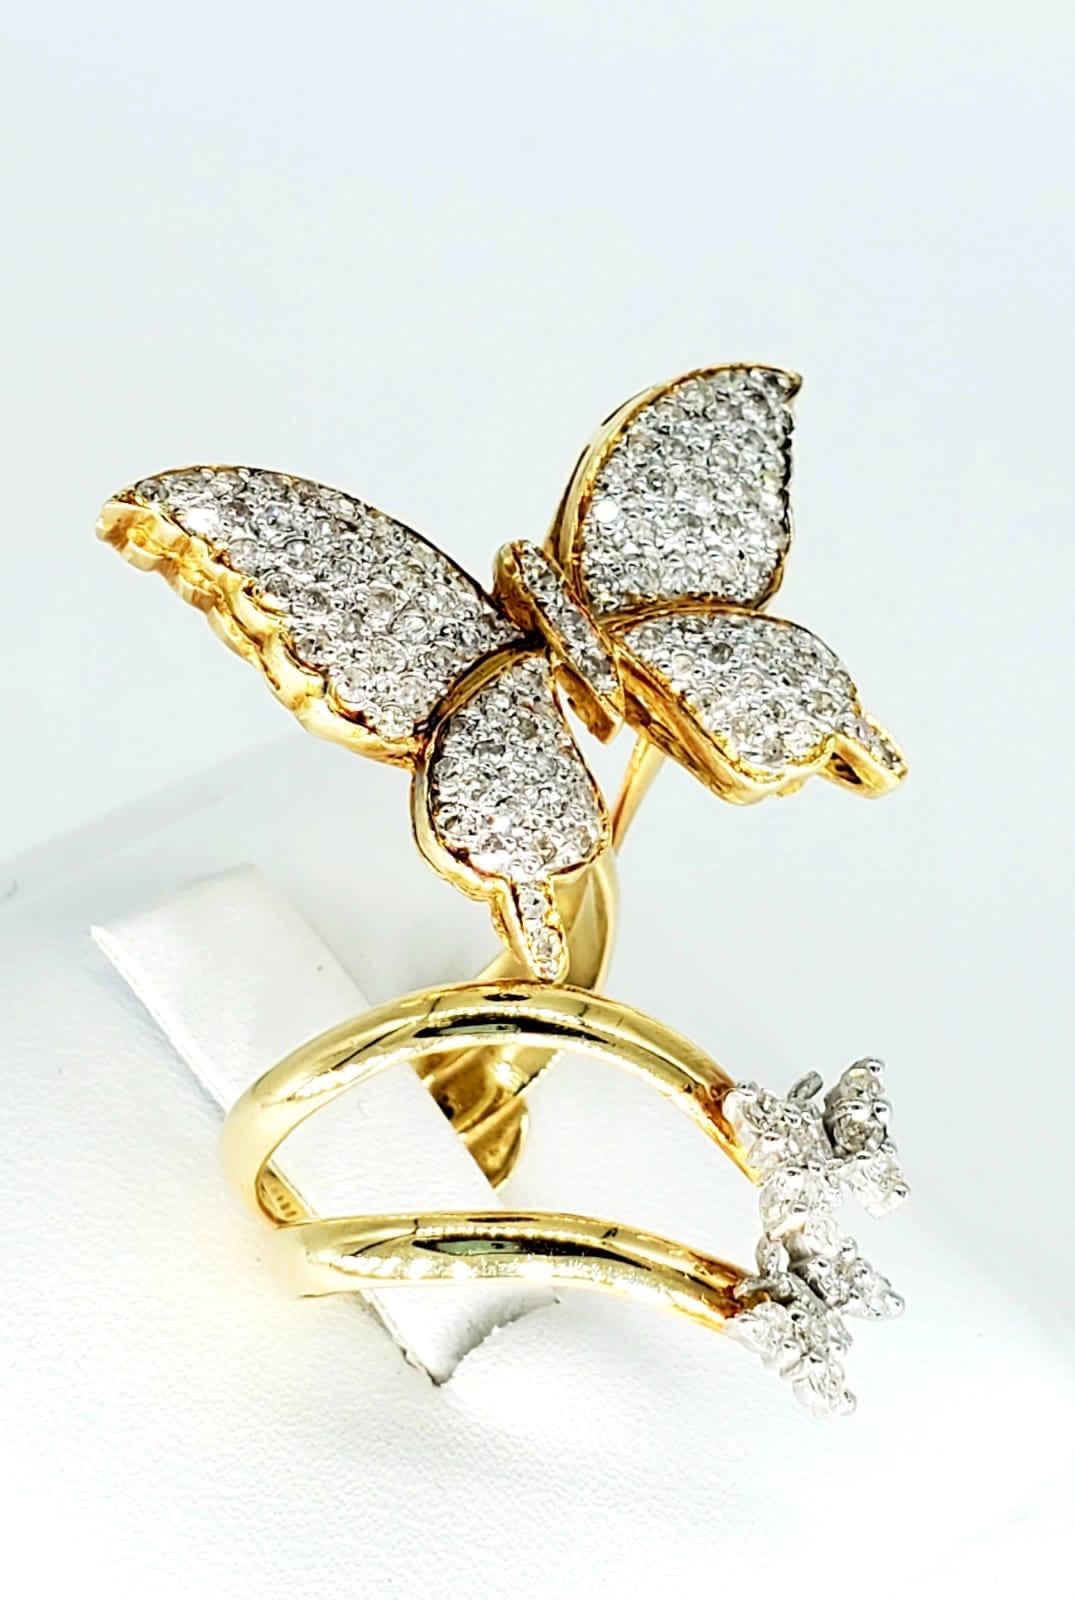 Designer 18k Gold & 1.50 Carat Diamond Butterfly Ring. The ring is stunning and really beautiful the picture does no justice. The ring features round white diamonds approx weight 1.50 carat and is made of 18k solid yellow gold. The ring features one